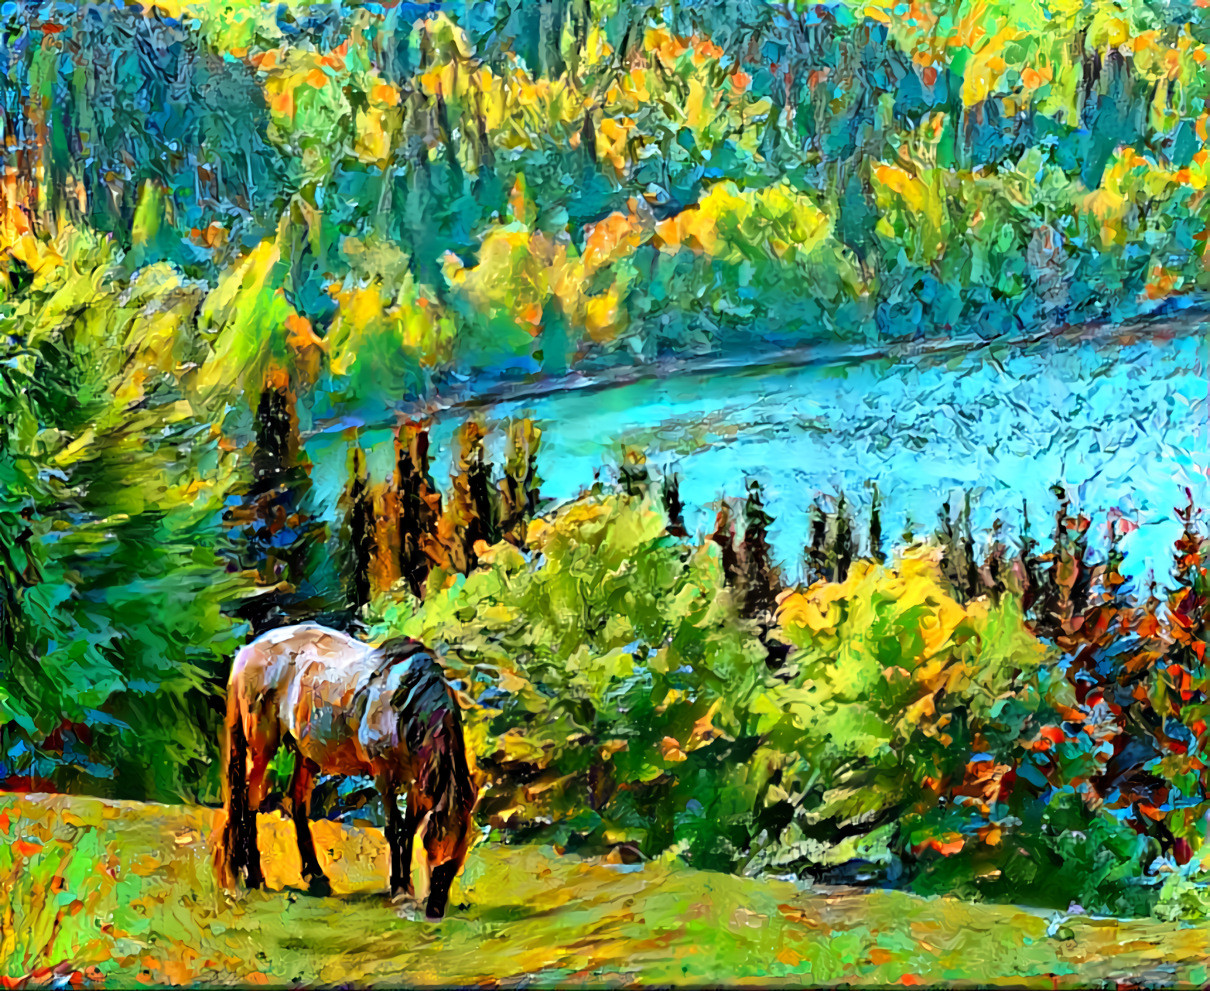 "Horse on the pasture"